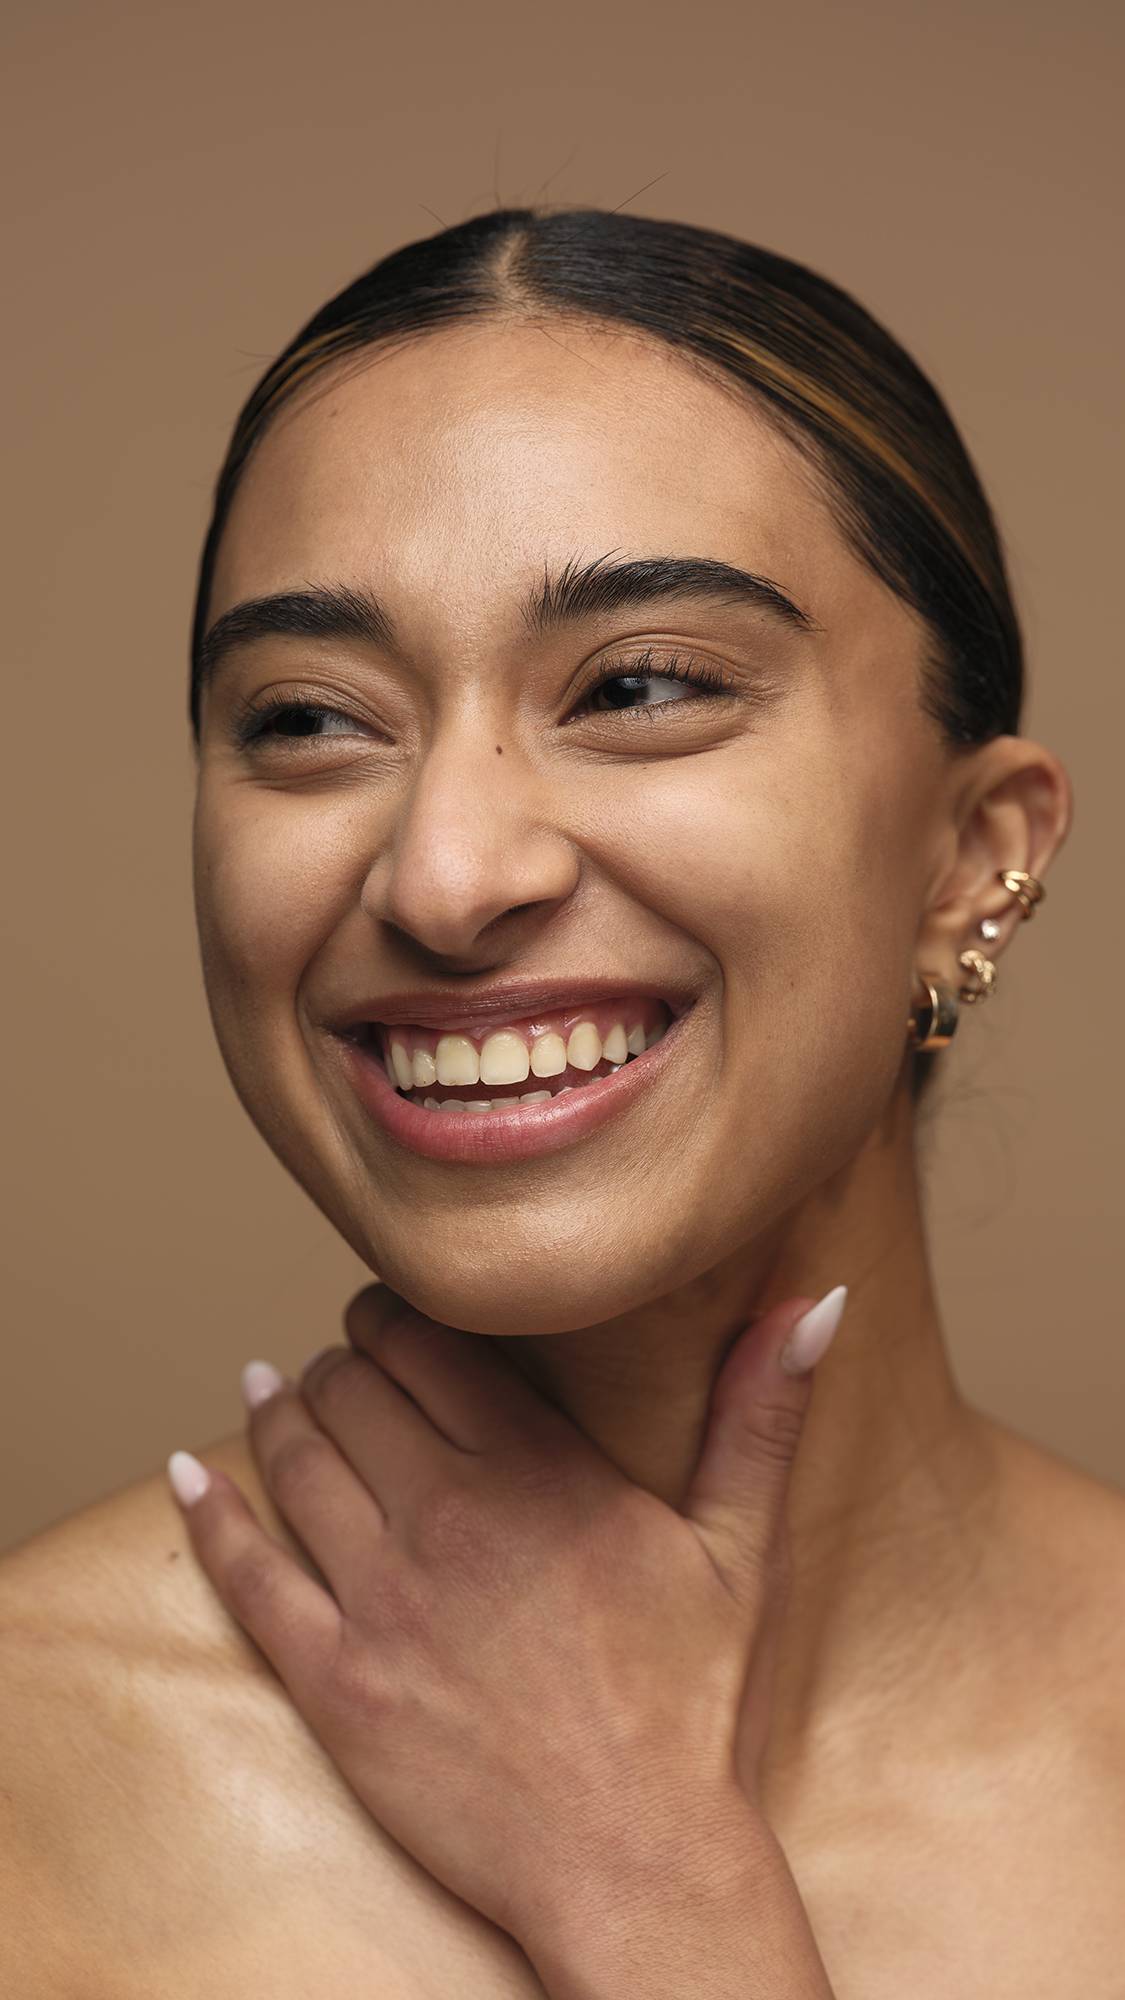 The model is on a warm, earthy-brown background with their hand across their chest and neck as they are smiling with glowing, freshly moisturised skin. 